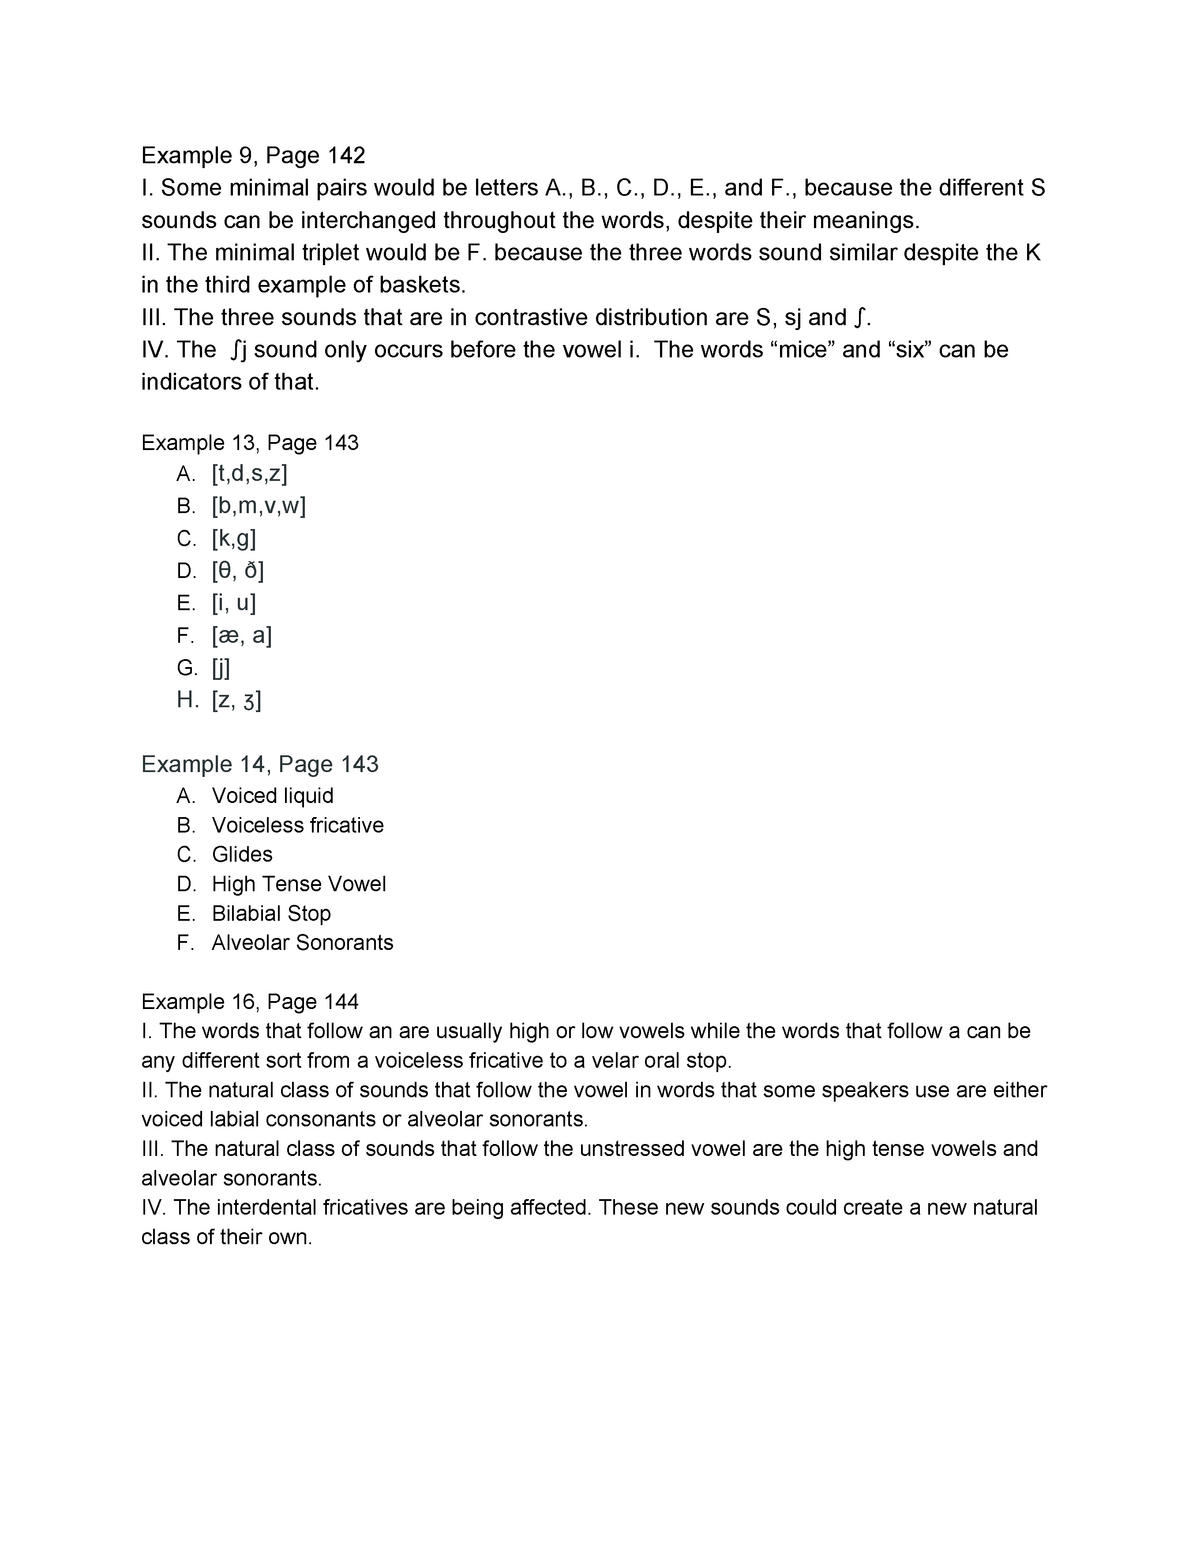 Phonology Exercises Mandatory Class Work With Answers Example Page 142 Some Minimal Pairs Would Be Letters And Because The Different Sounds Can Be Studocu